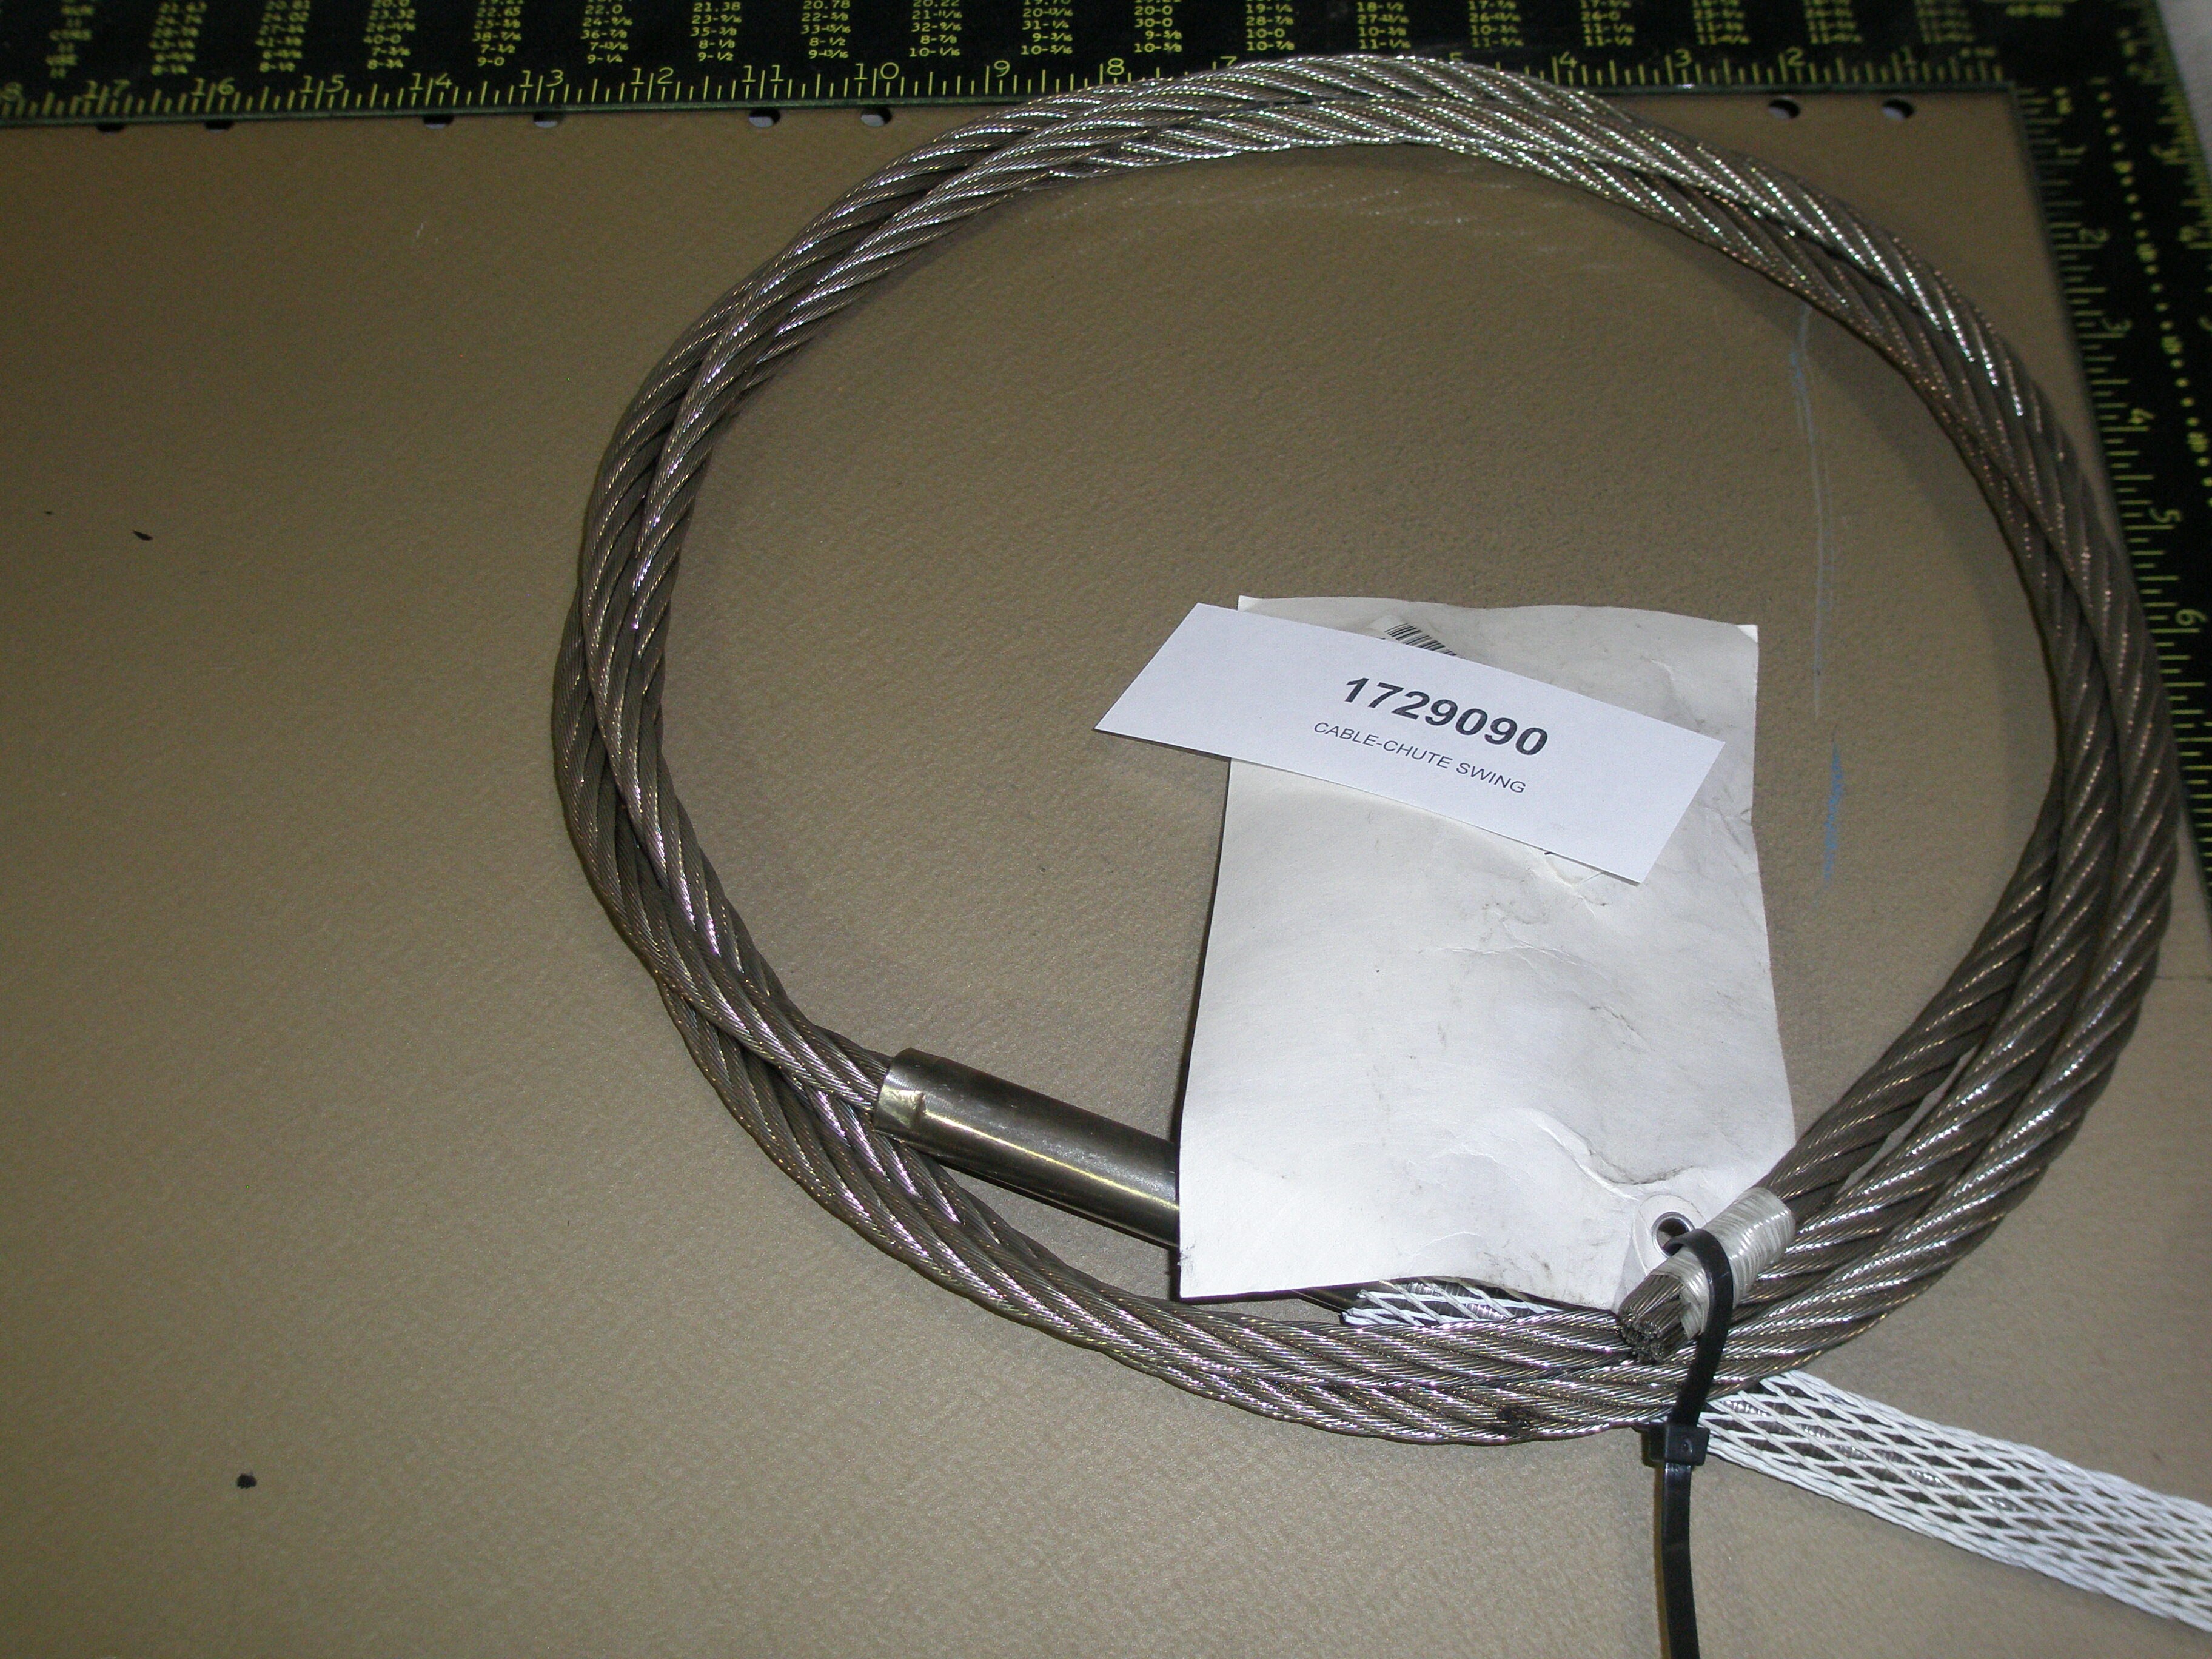 CABLE-CHUTE SWING